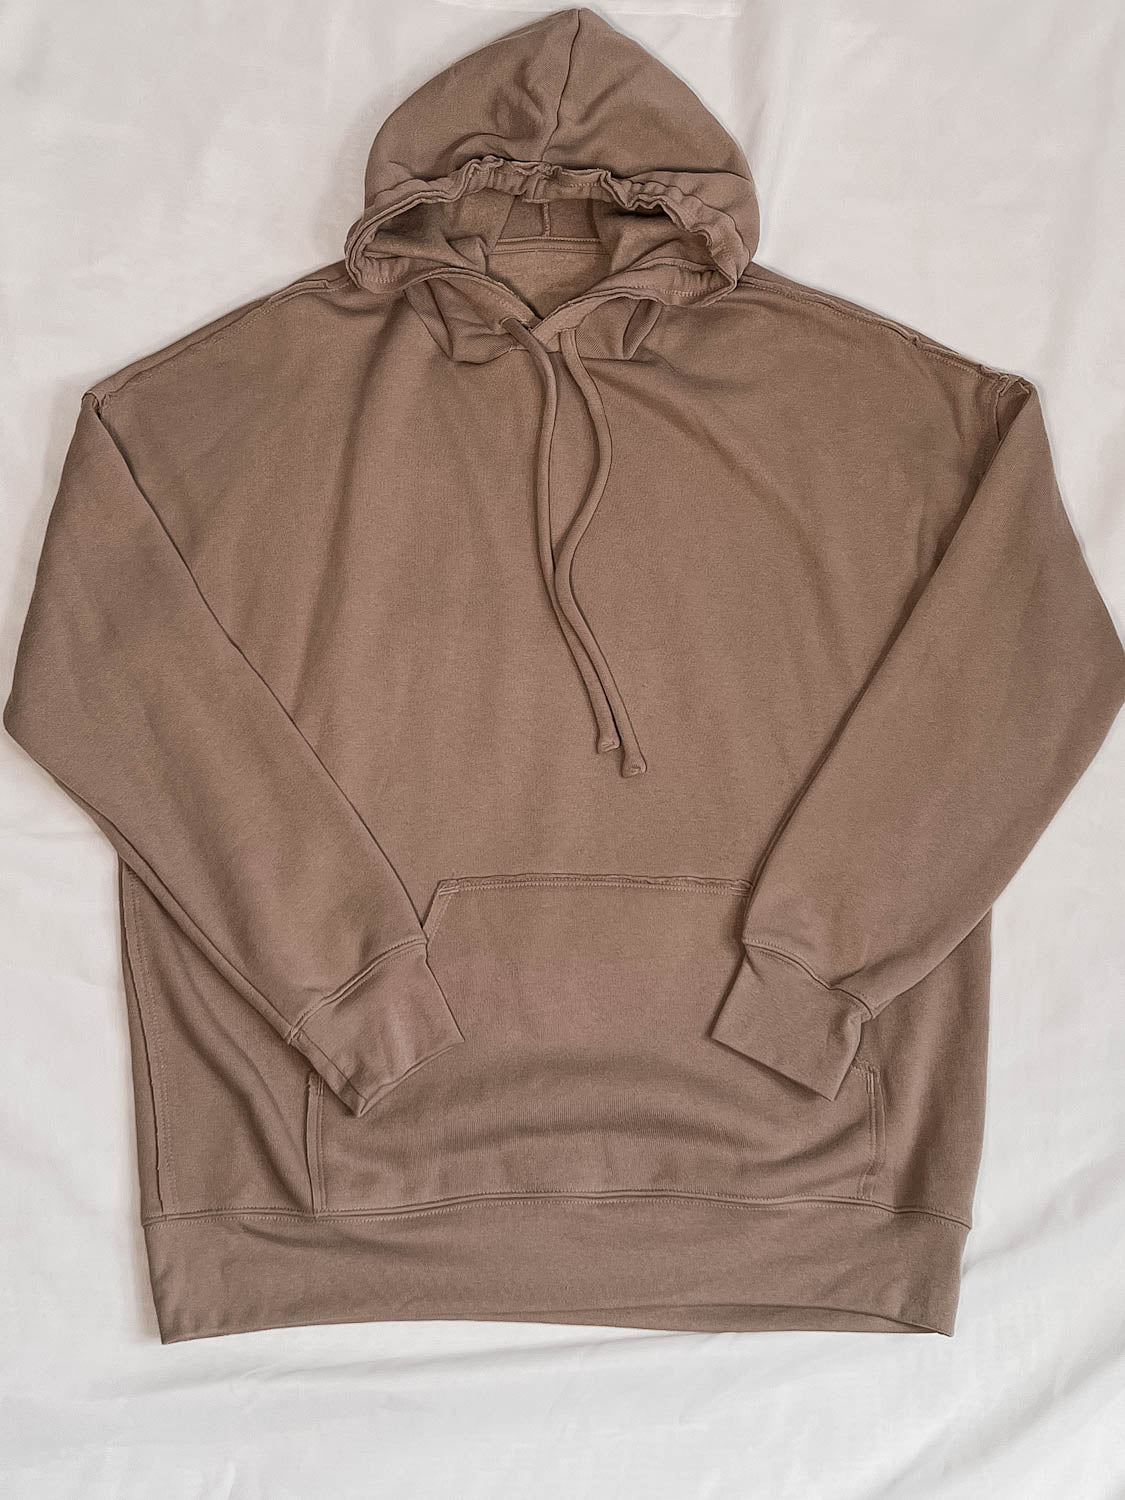 IMPERFECT / SALE - Co-Ords Sand Hoodie XL Out The Purse